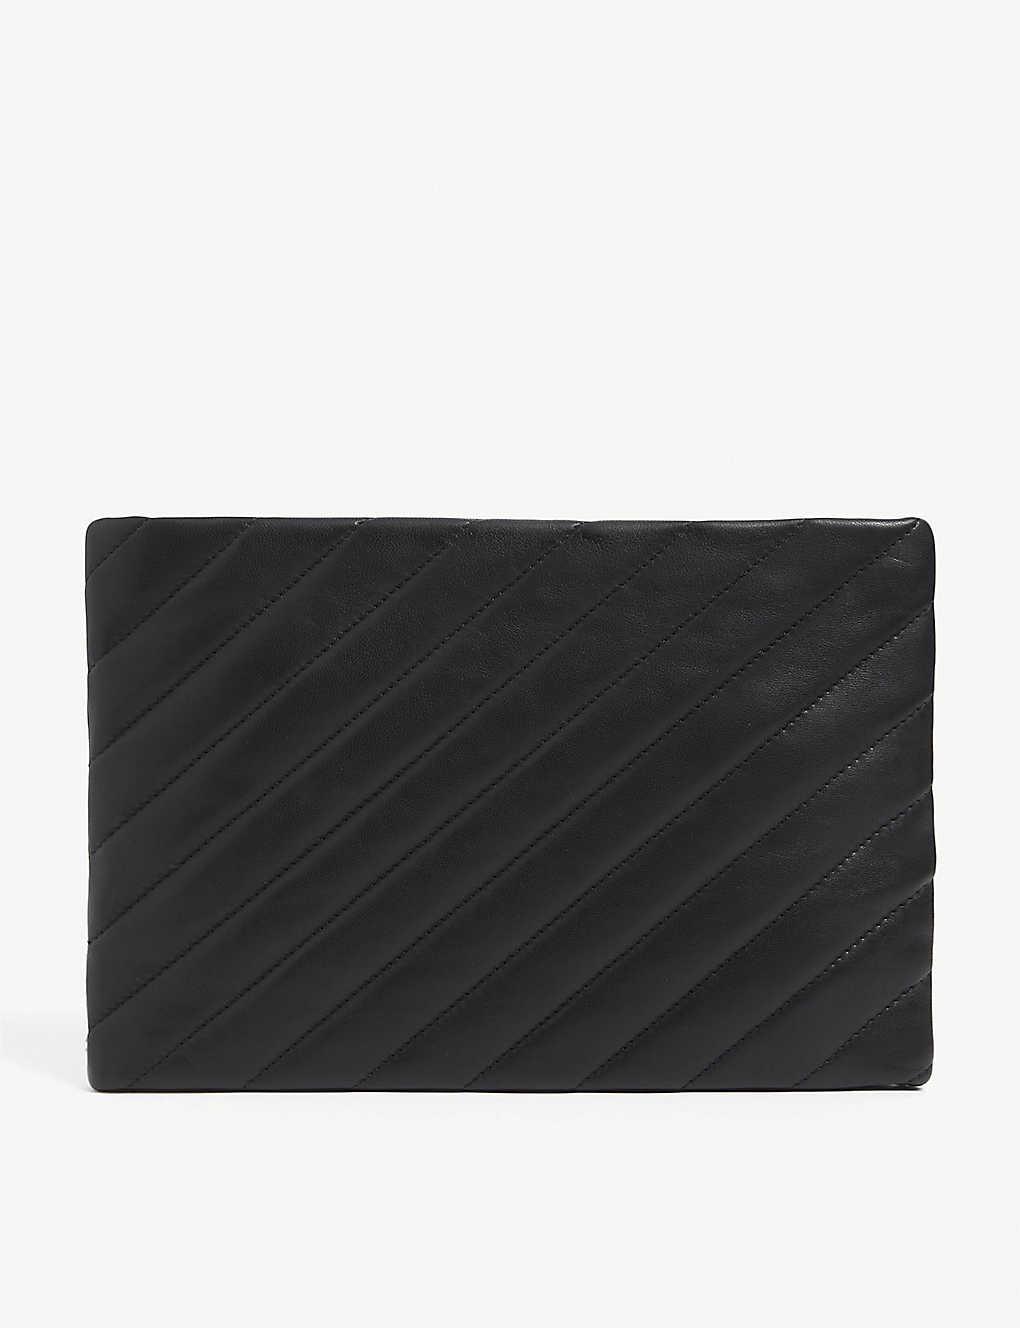 AllSaints Womens Black Bettina Quilted-leather Clutch Bag 1 Size